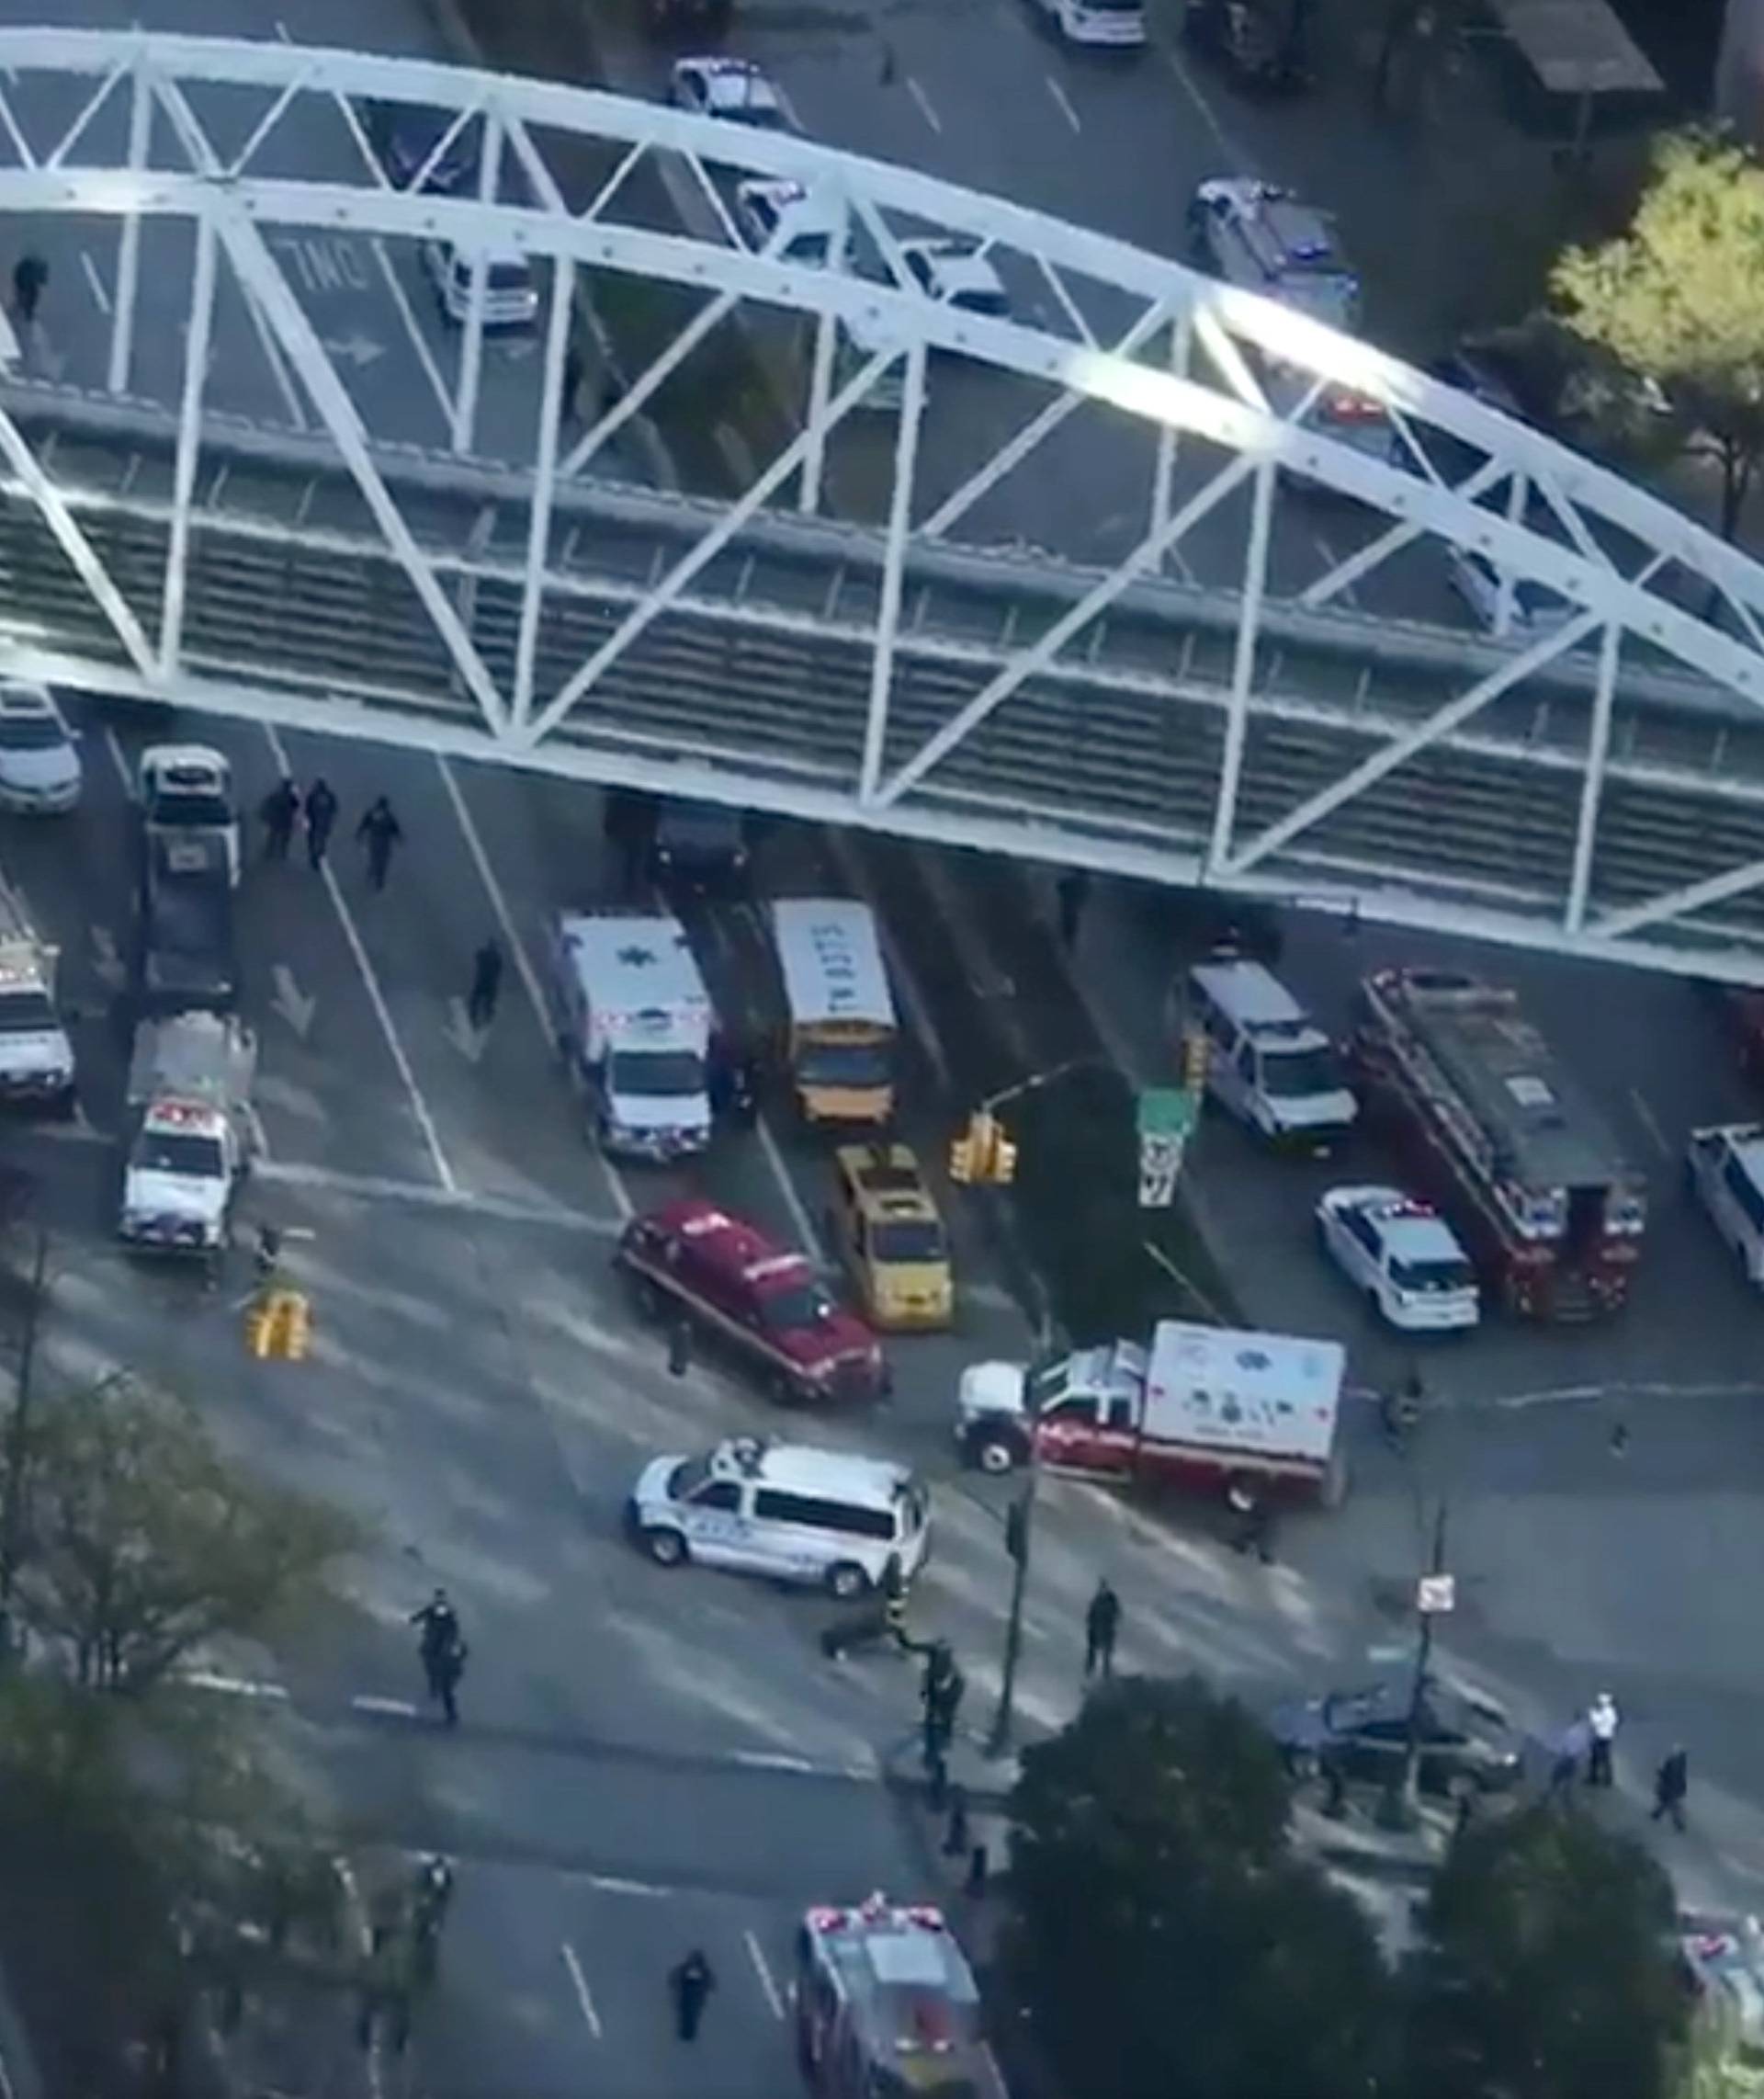 Video grab of the scene of an alleged shooting incident on West Street in Manhattan, New York